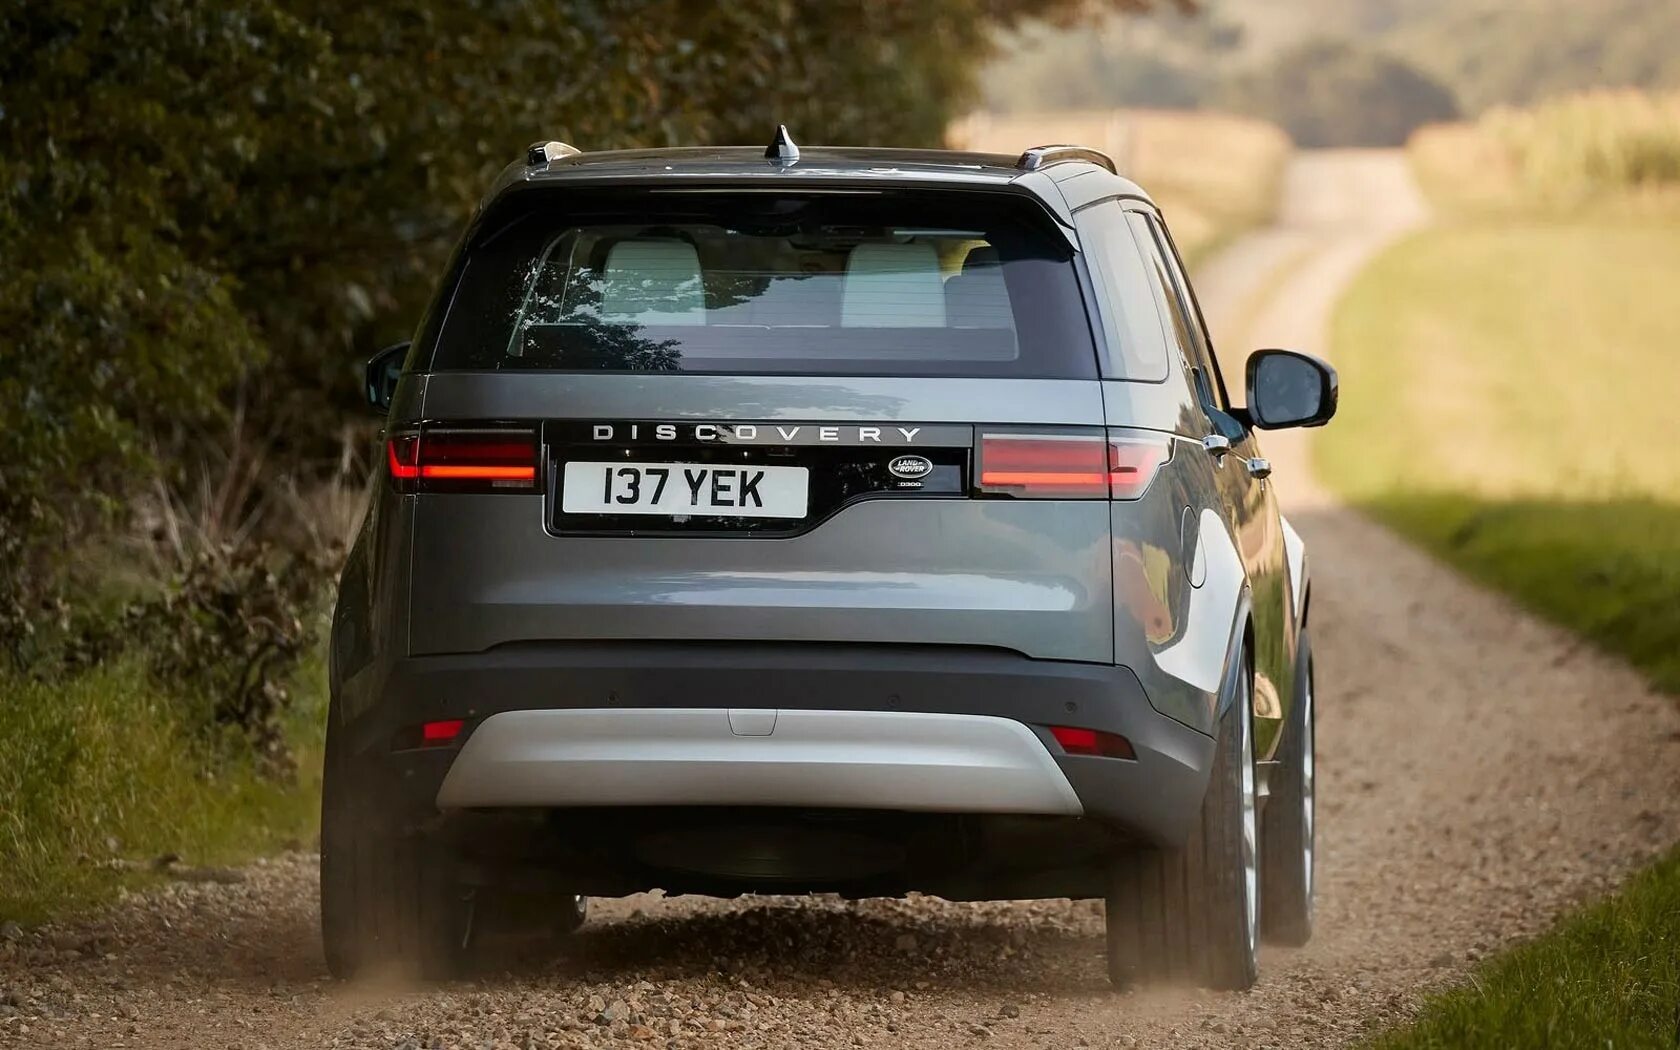 Land Rover Discovery 2021. Ленд Ровер Дискавери 2021. Land Rover Discovery 5. Новый ленд ровер дискавери